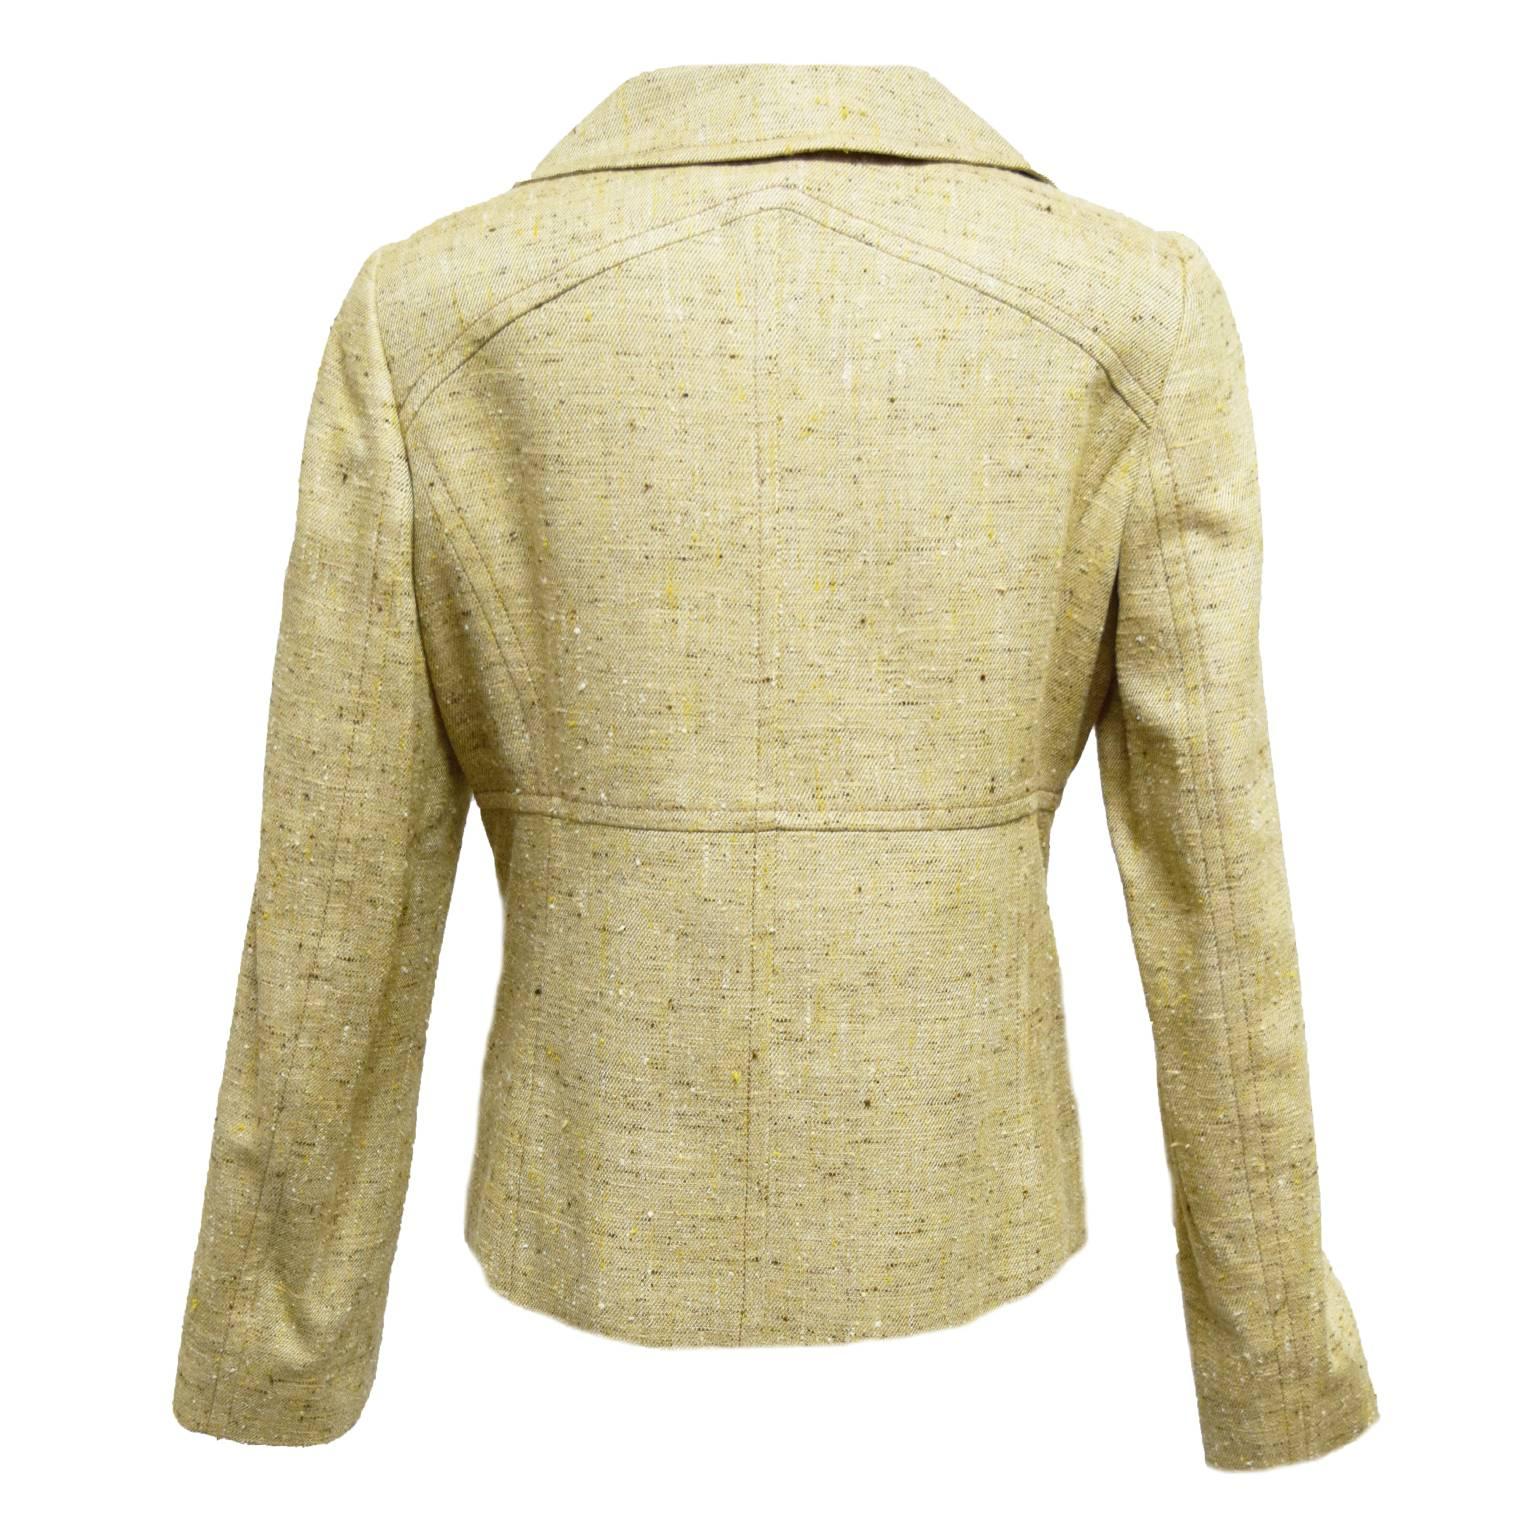 This Valentino jacket is a butter beige yellow twill and is fully lined. It is single lapeled and tortes shell buttons for a nice contrast. There is a dart along the waist to break of the body for a more slimming look and two side pockets. 